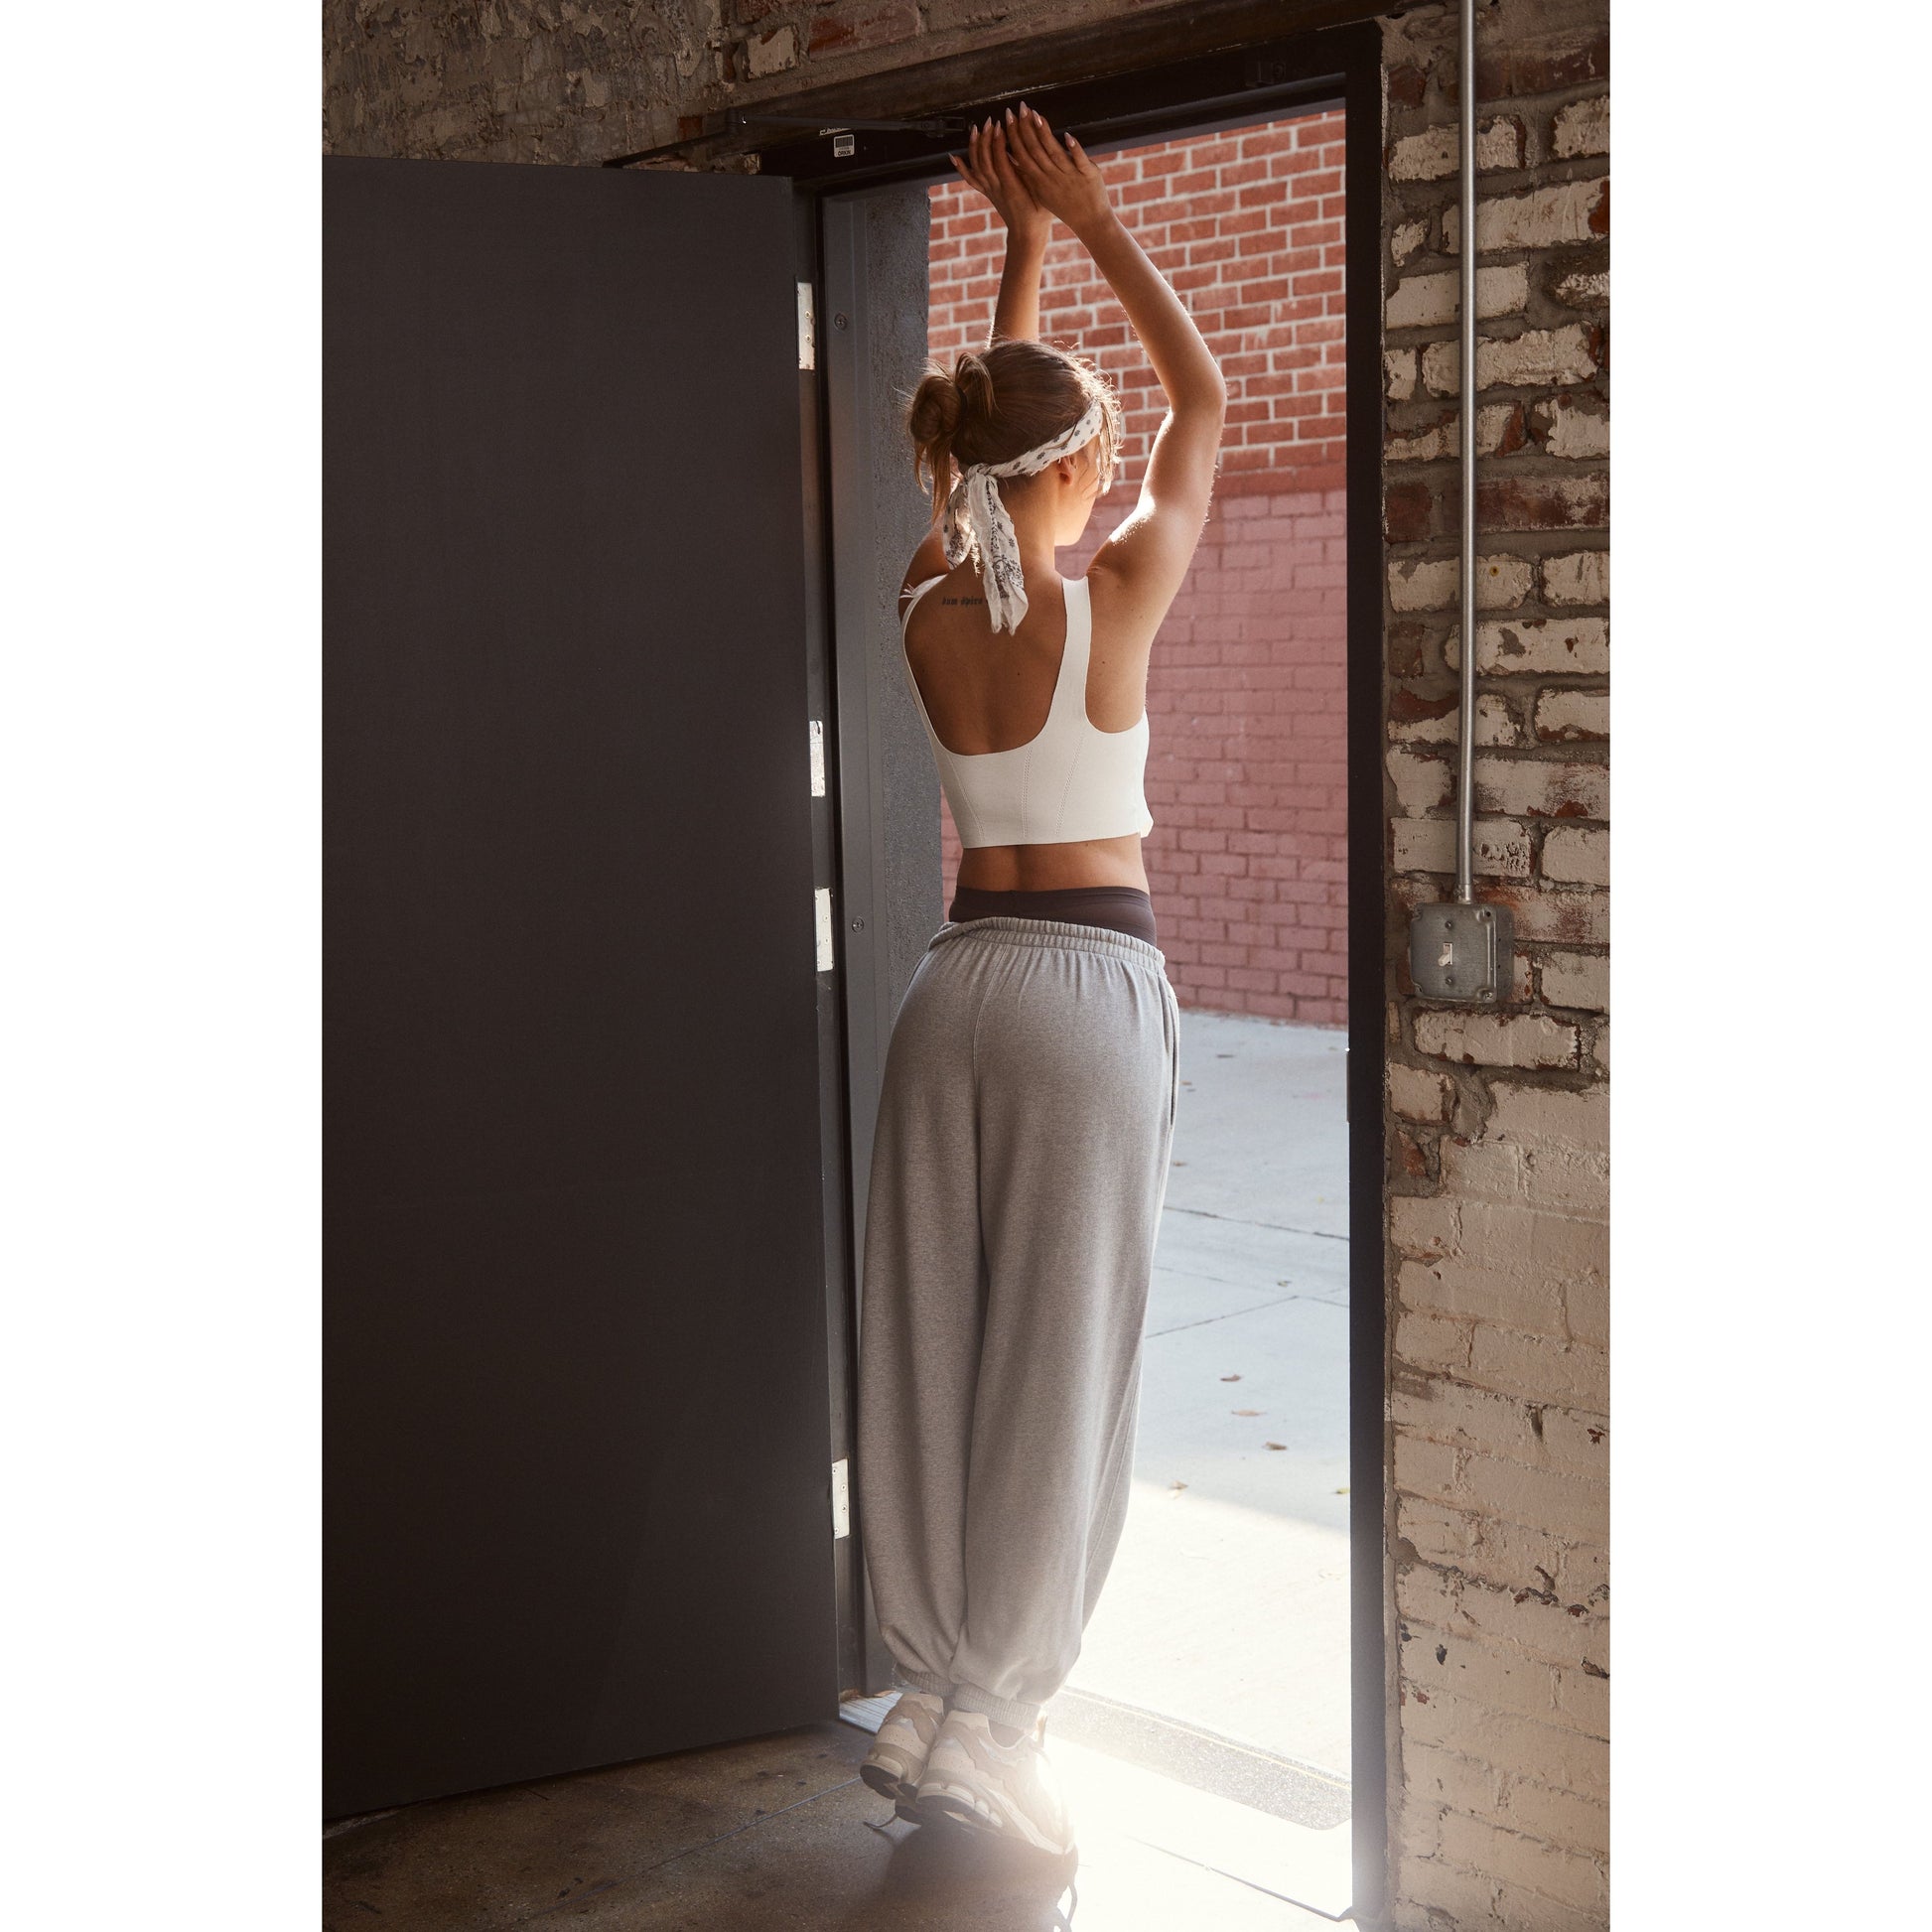 A woman in a Free People Movement Strong Core Corset Cami, White and grey sweatpants stretches her arms up near an open doorway, facing a brick wall.